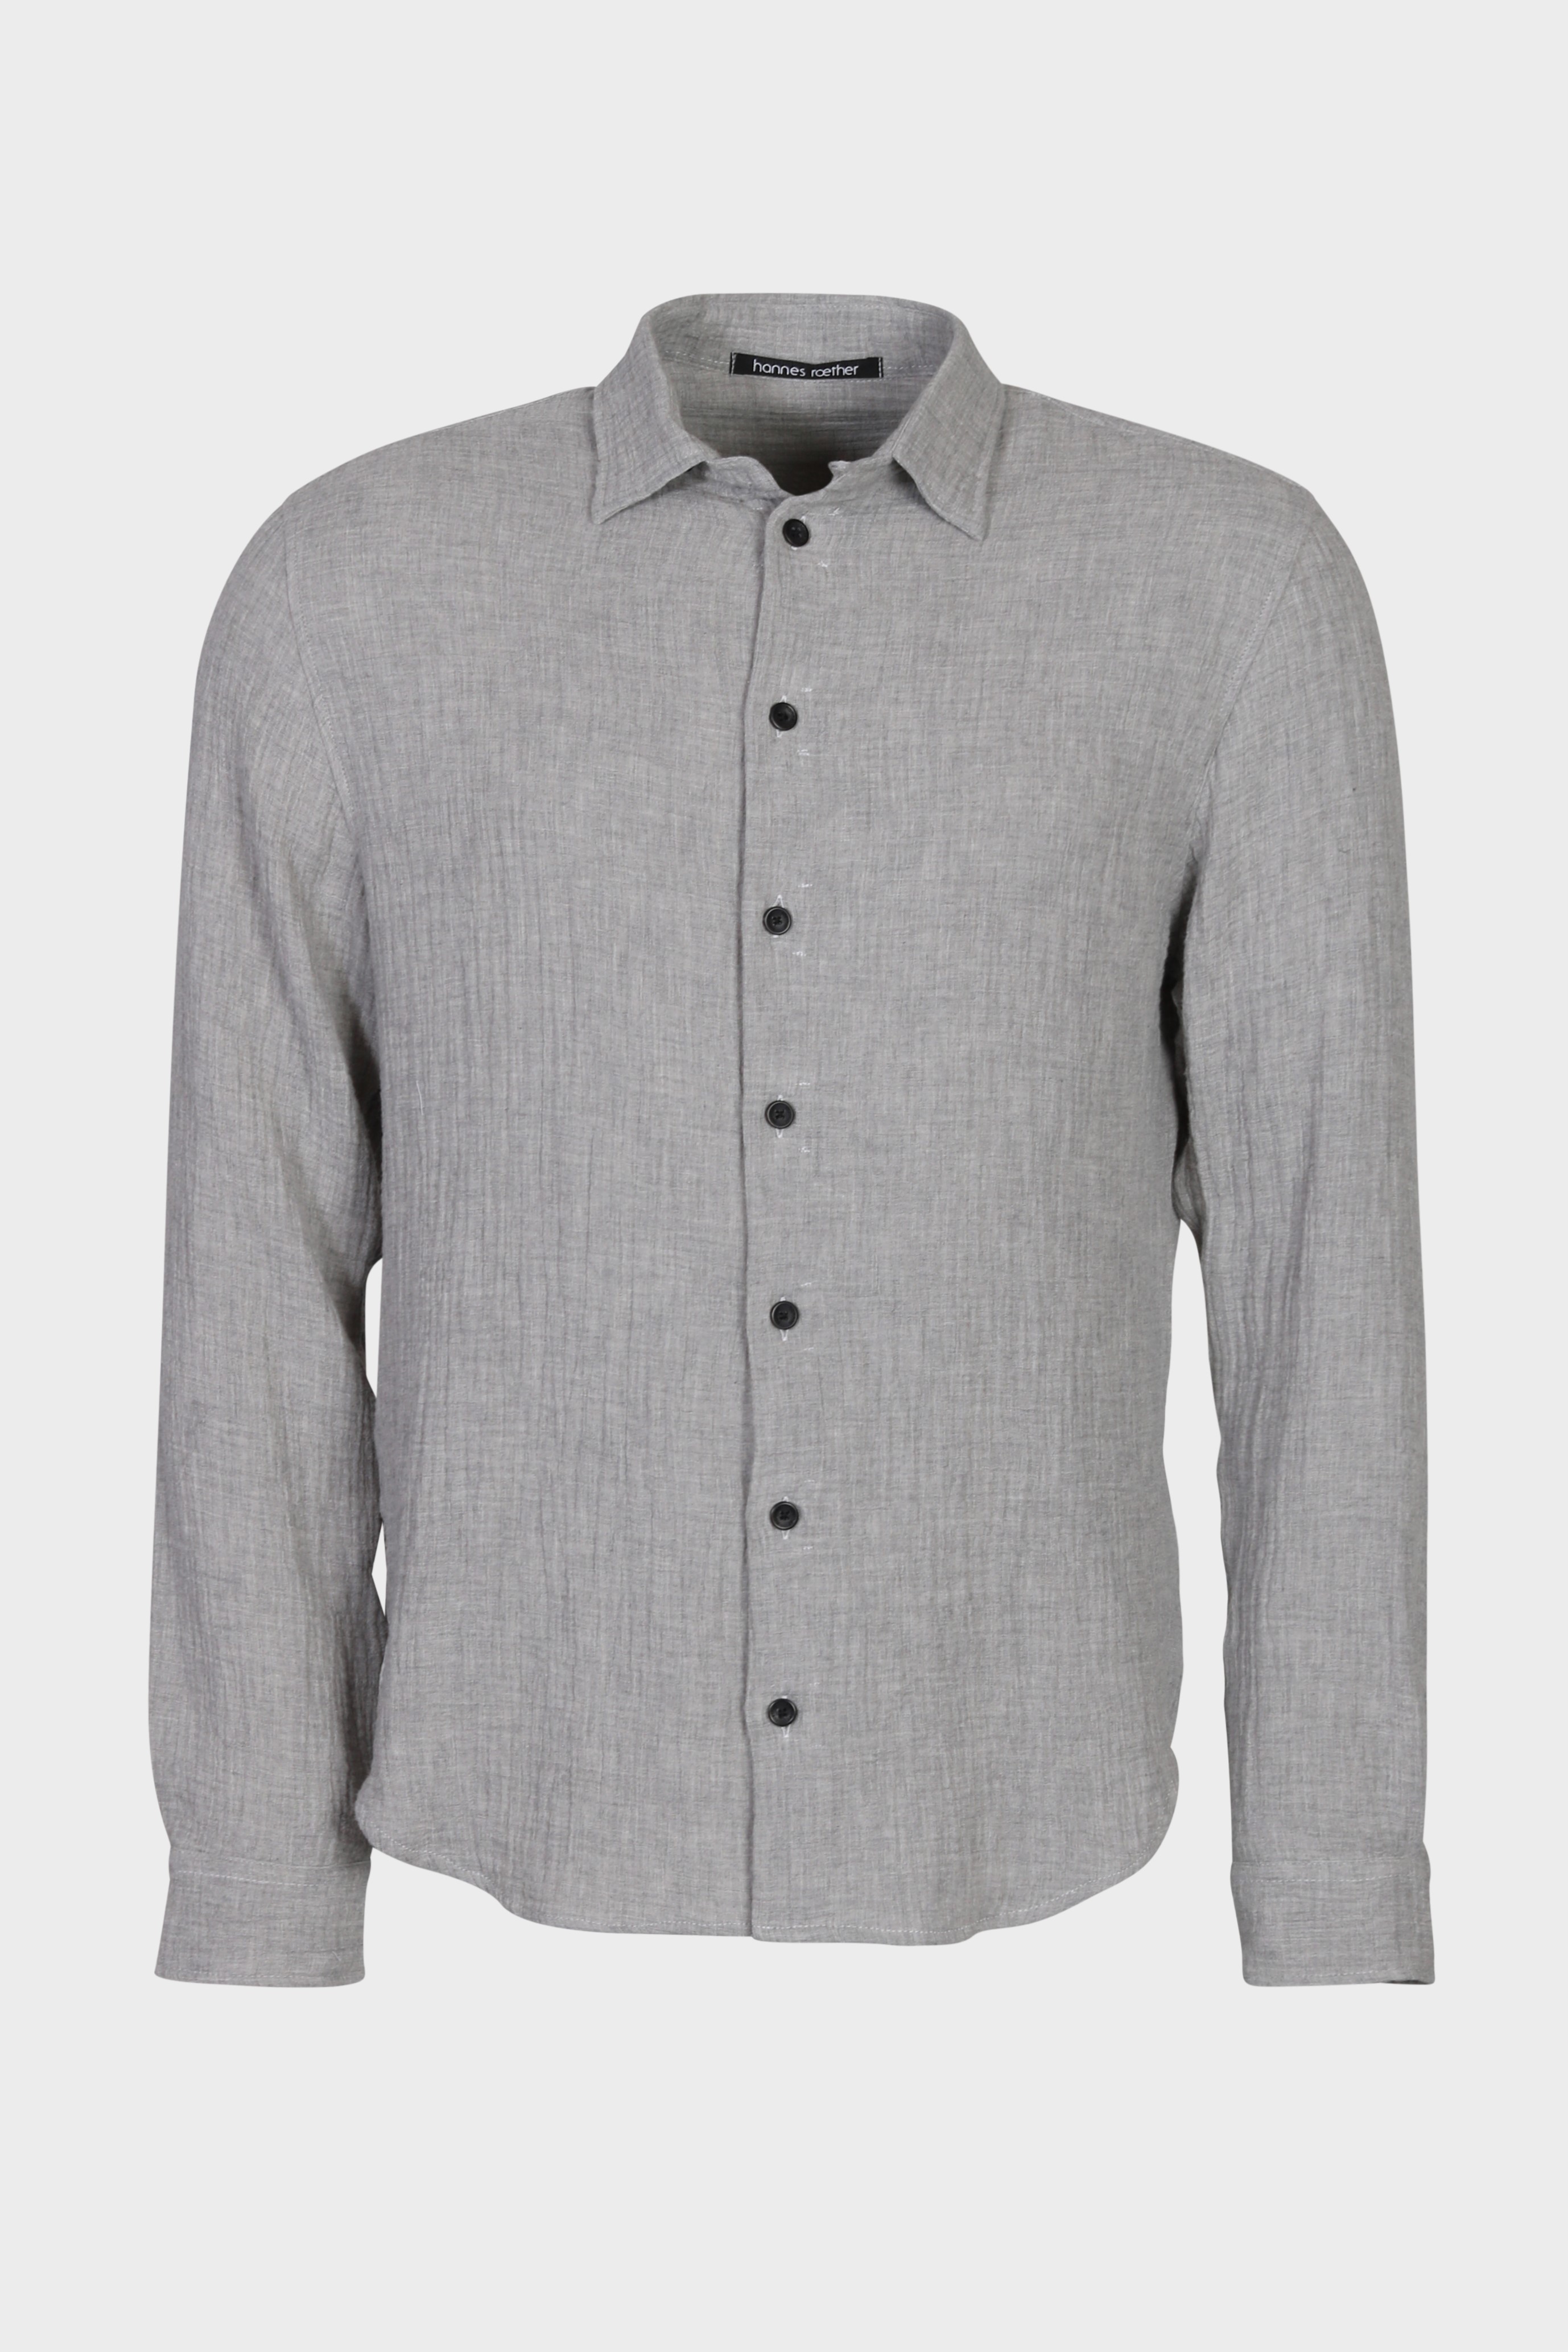 HANNES ROETHER Mousseline Shirt in Light Grey